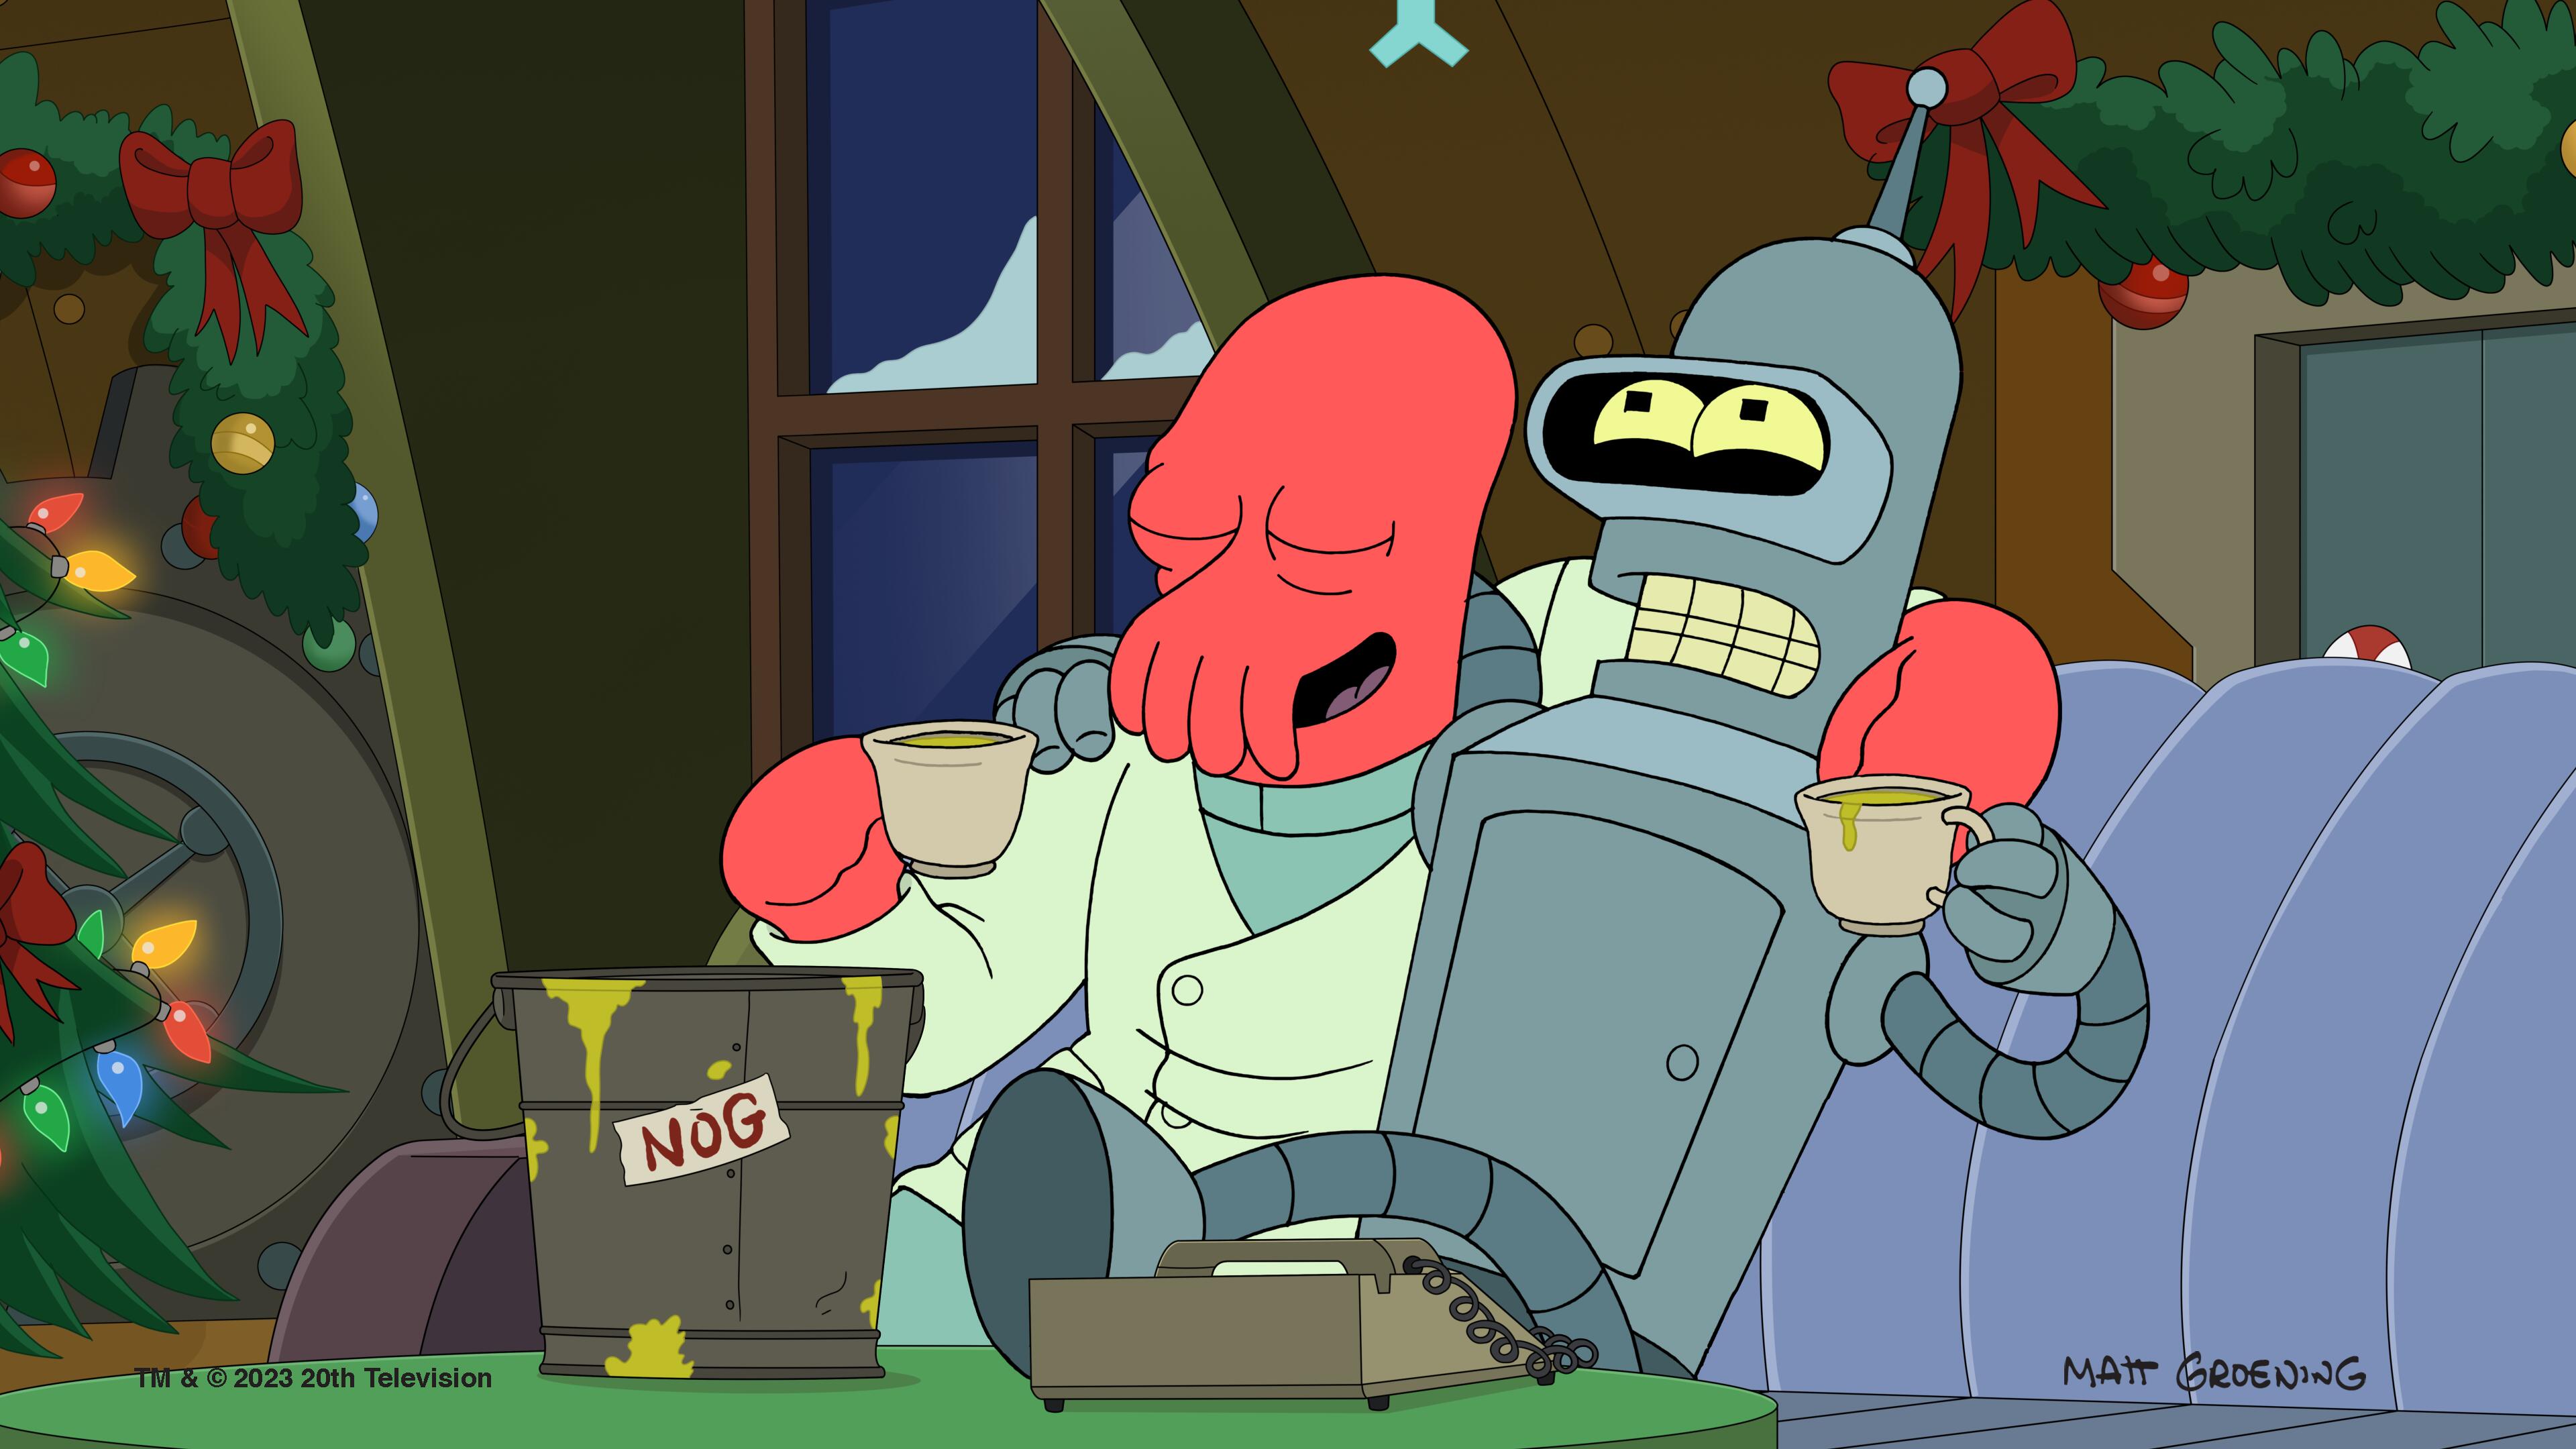 Zoidberg (Billy West) and Bender (John DiMaggio) share a bucket of dumpster nog in Futurama season 11's "I Know What You Did Next Xmas"